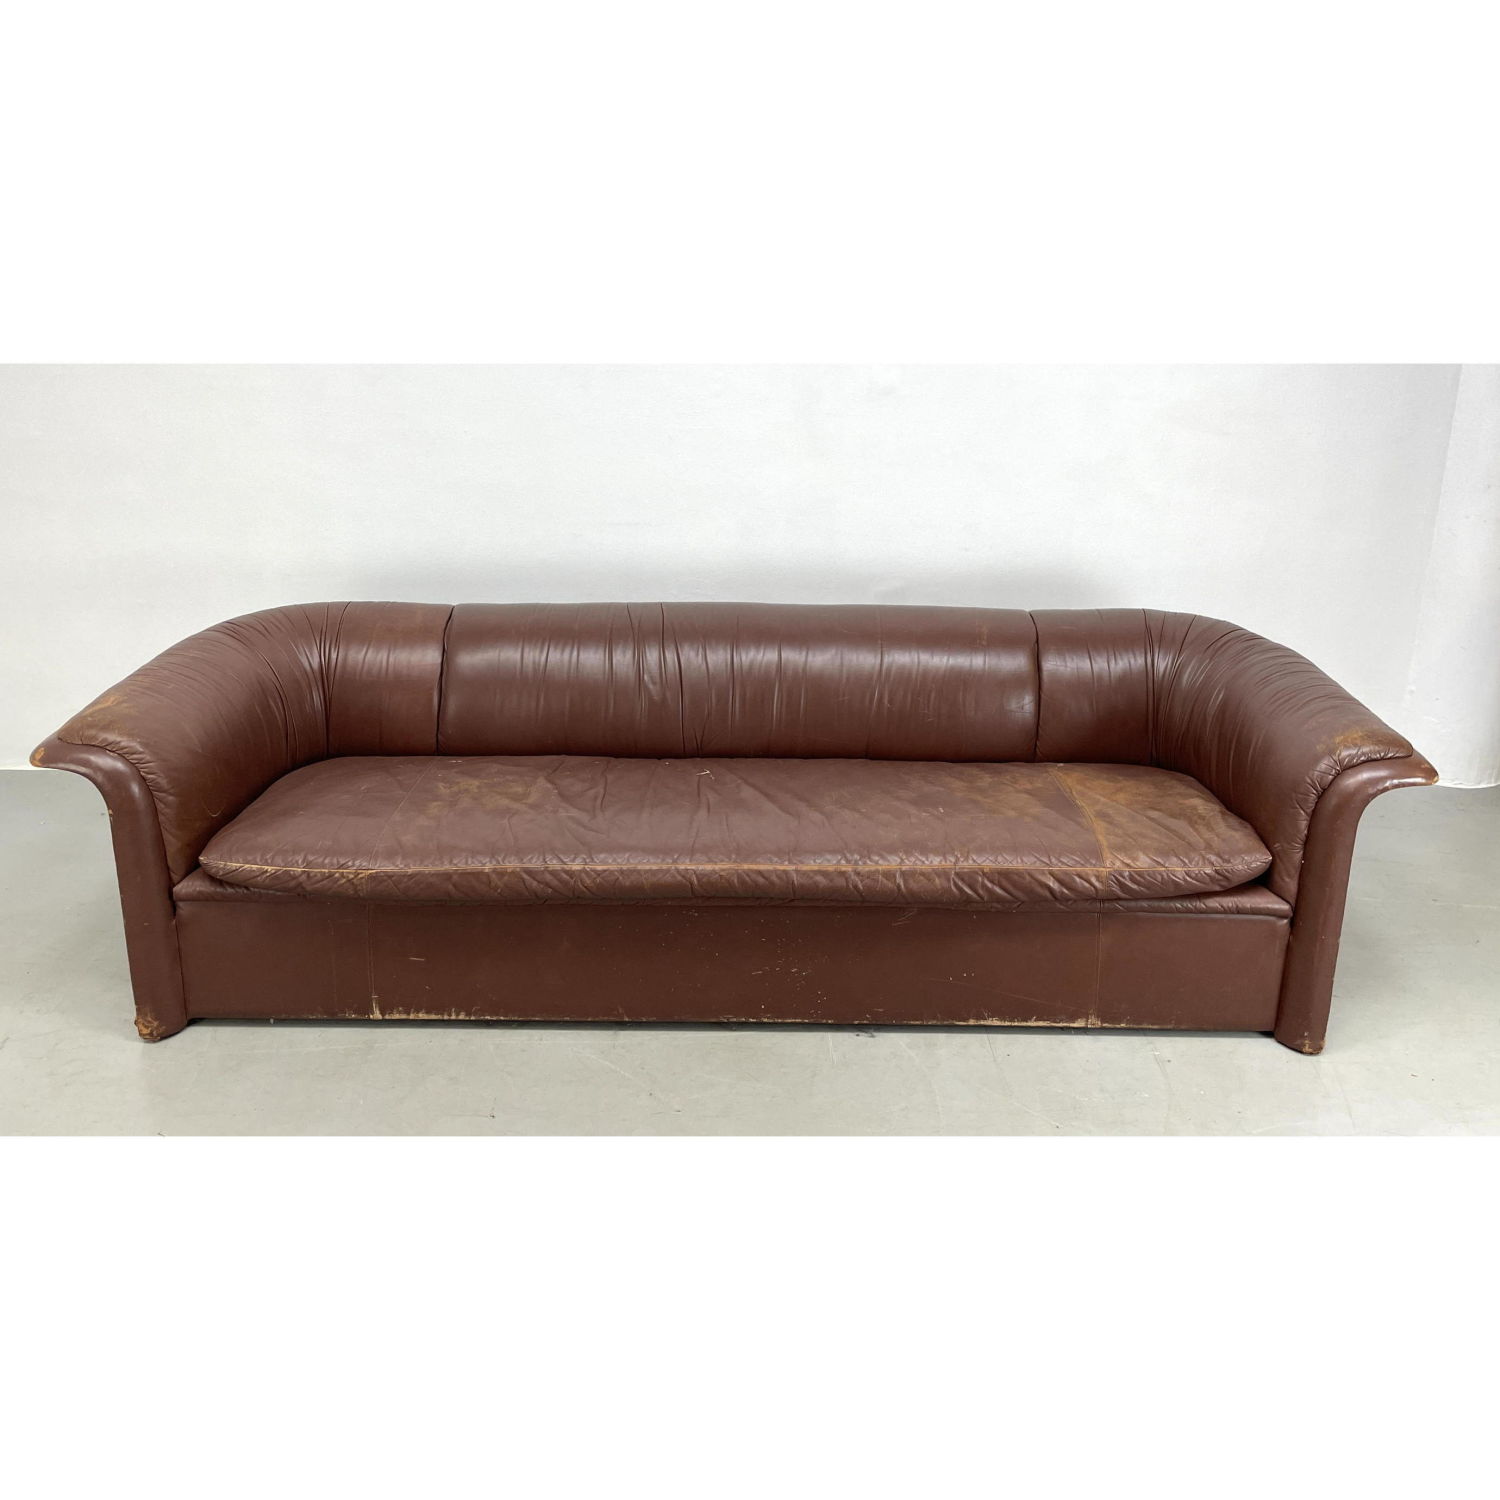 DUNBAR Brown Leather Couch Sofa.